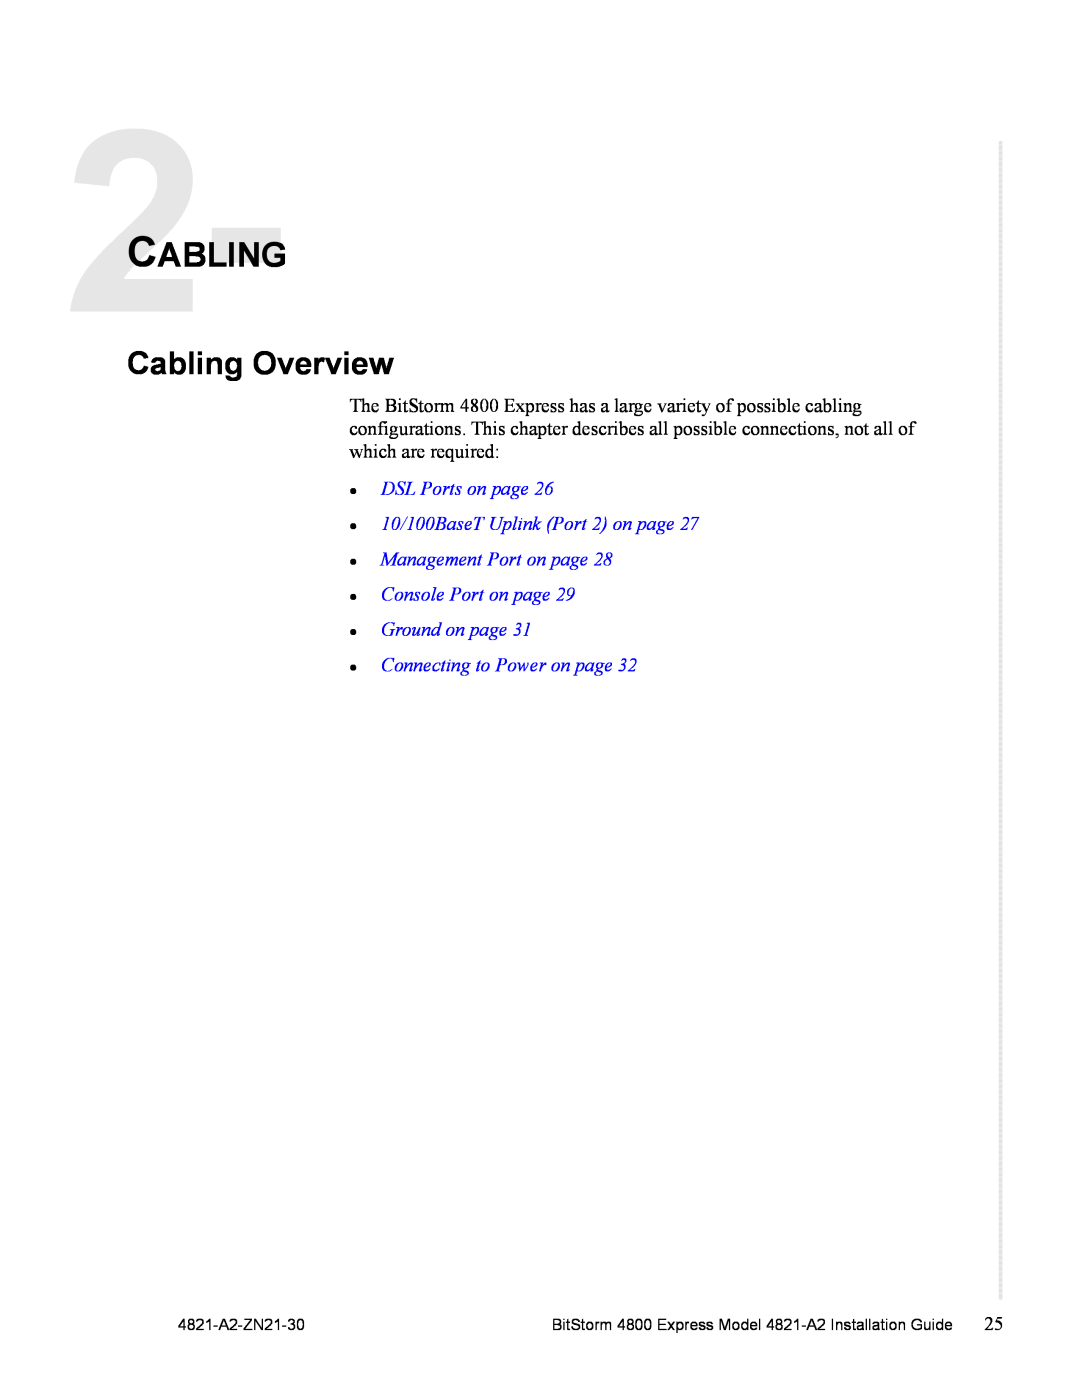 Zhone Technologies manual Cabling Overview, DSL Ports on page 10/100BaseT Uplink Port 2 on page, 4821-A2-ZN21-30 